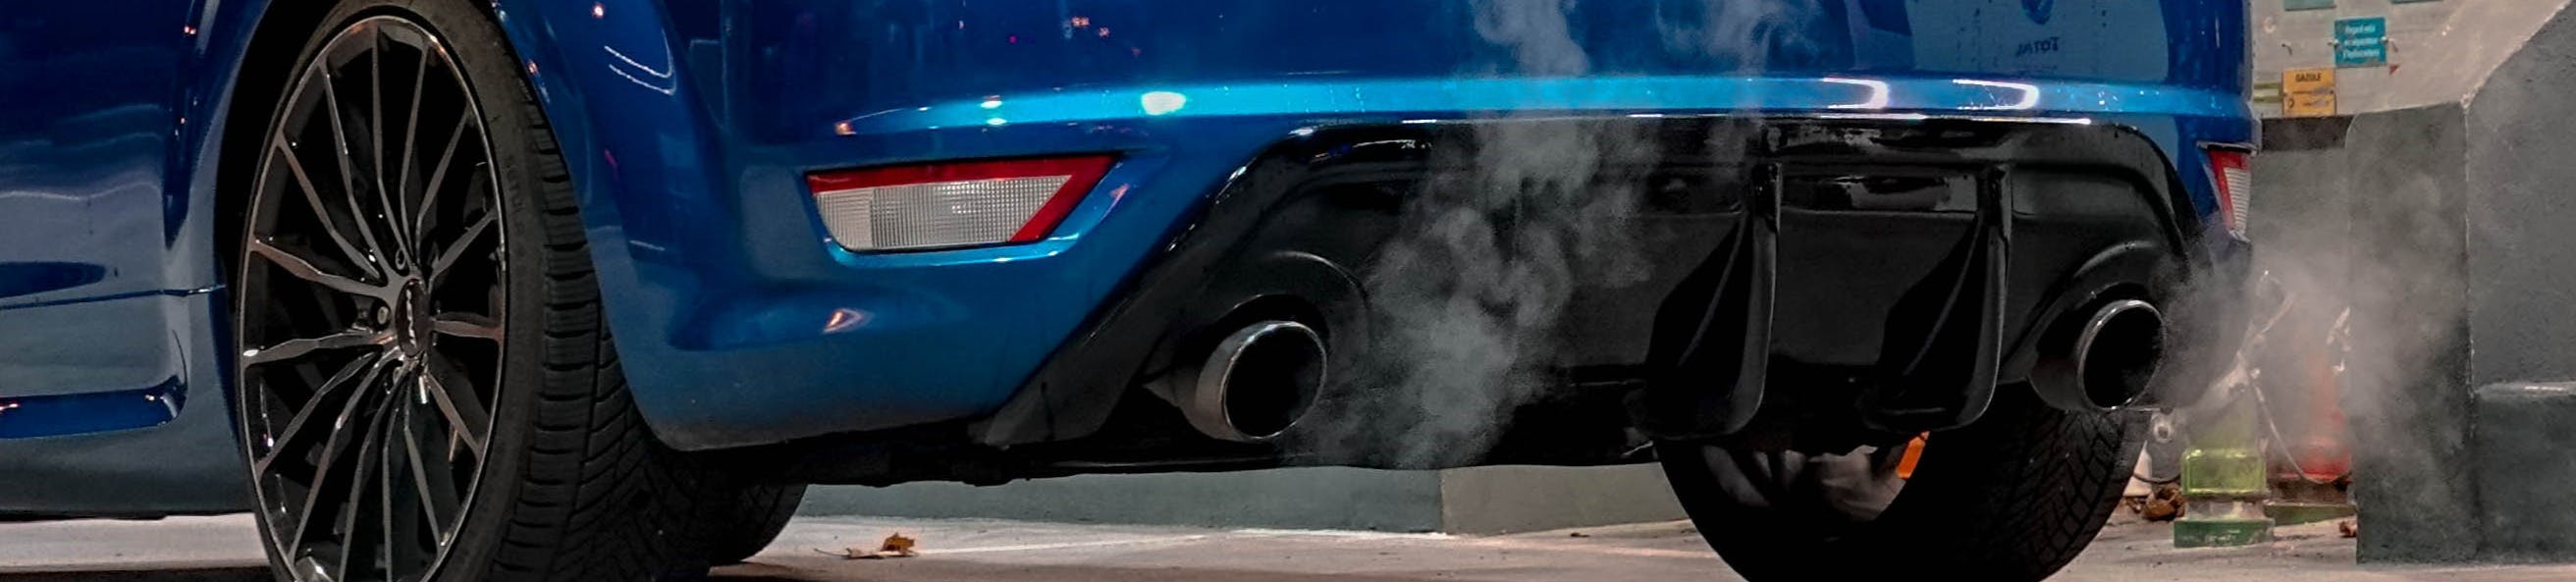 Close up photo of a car’s exhaust pipe with emissions coming out as the vehicle idles